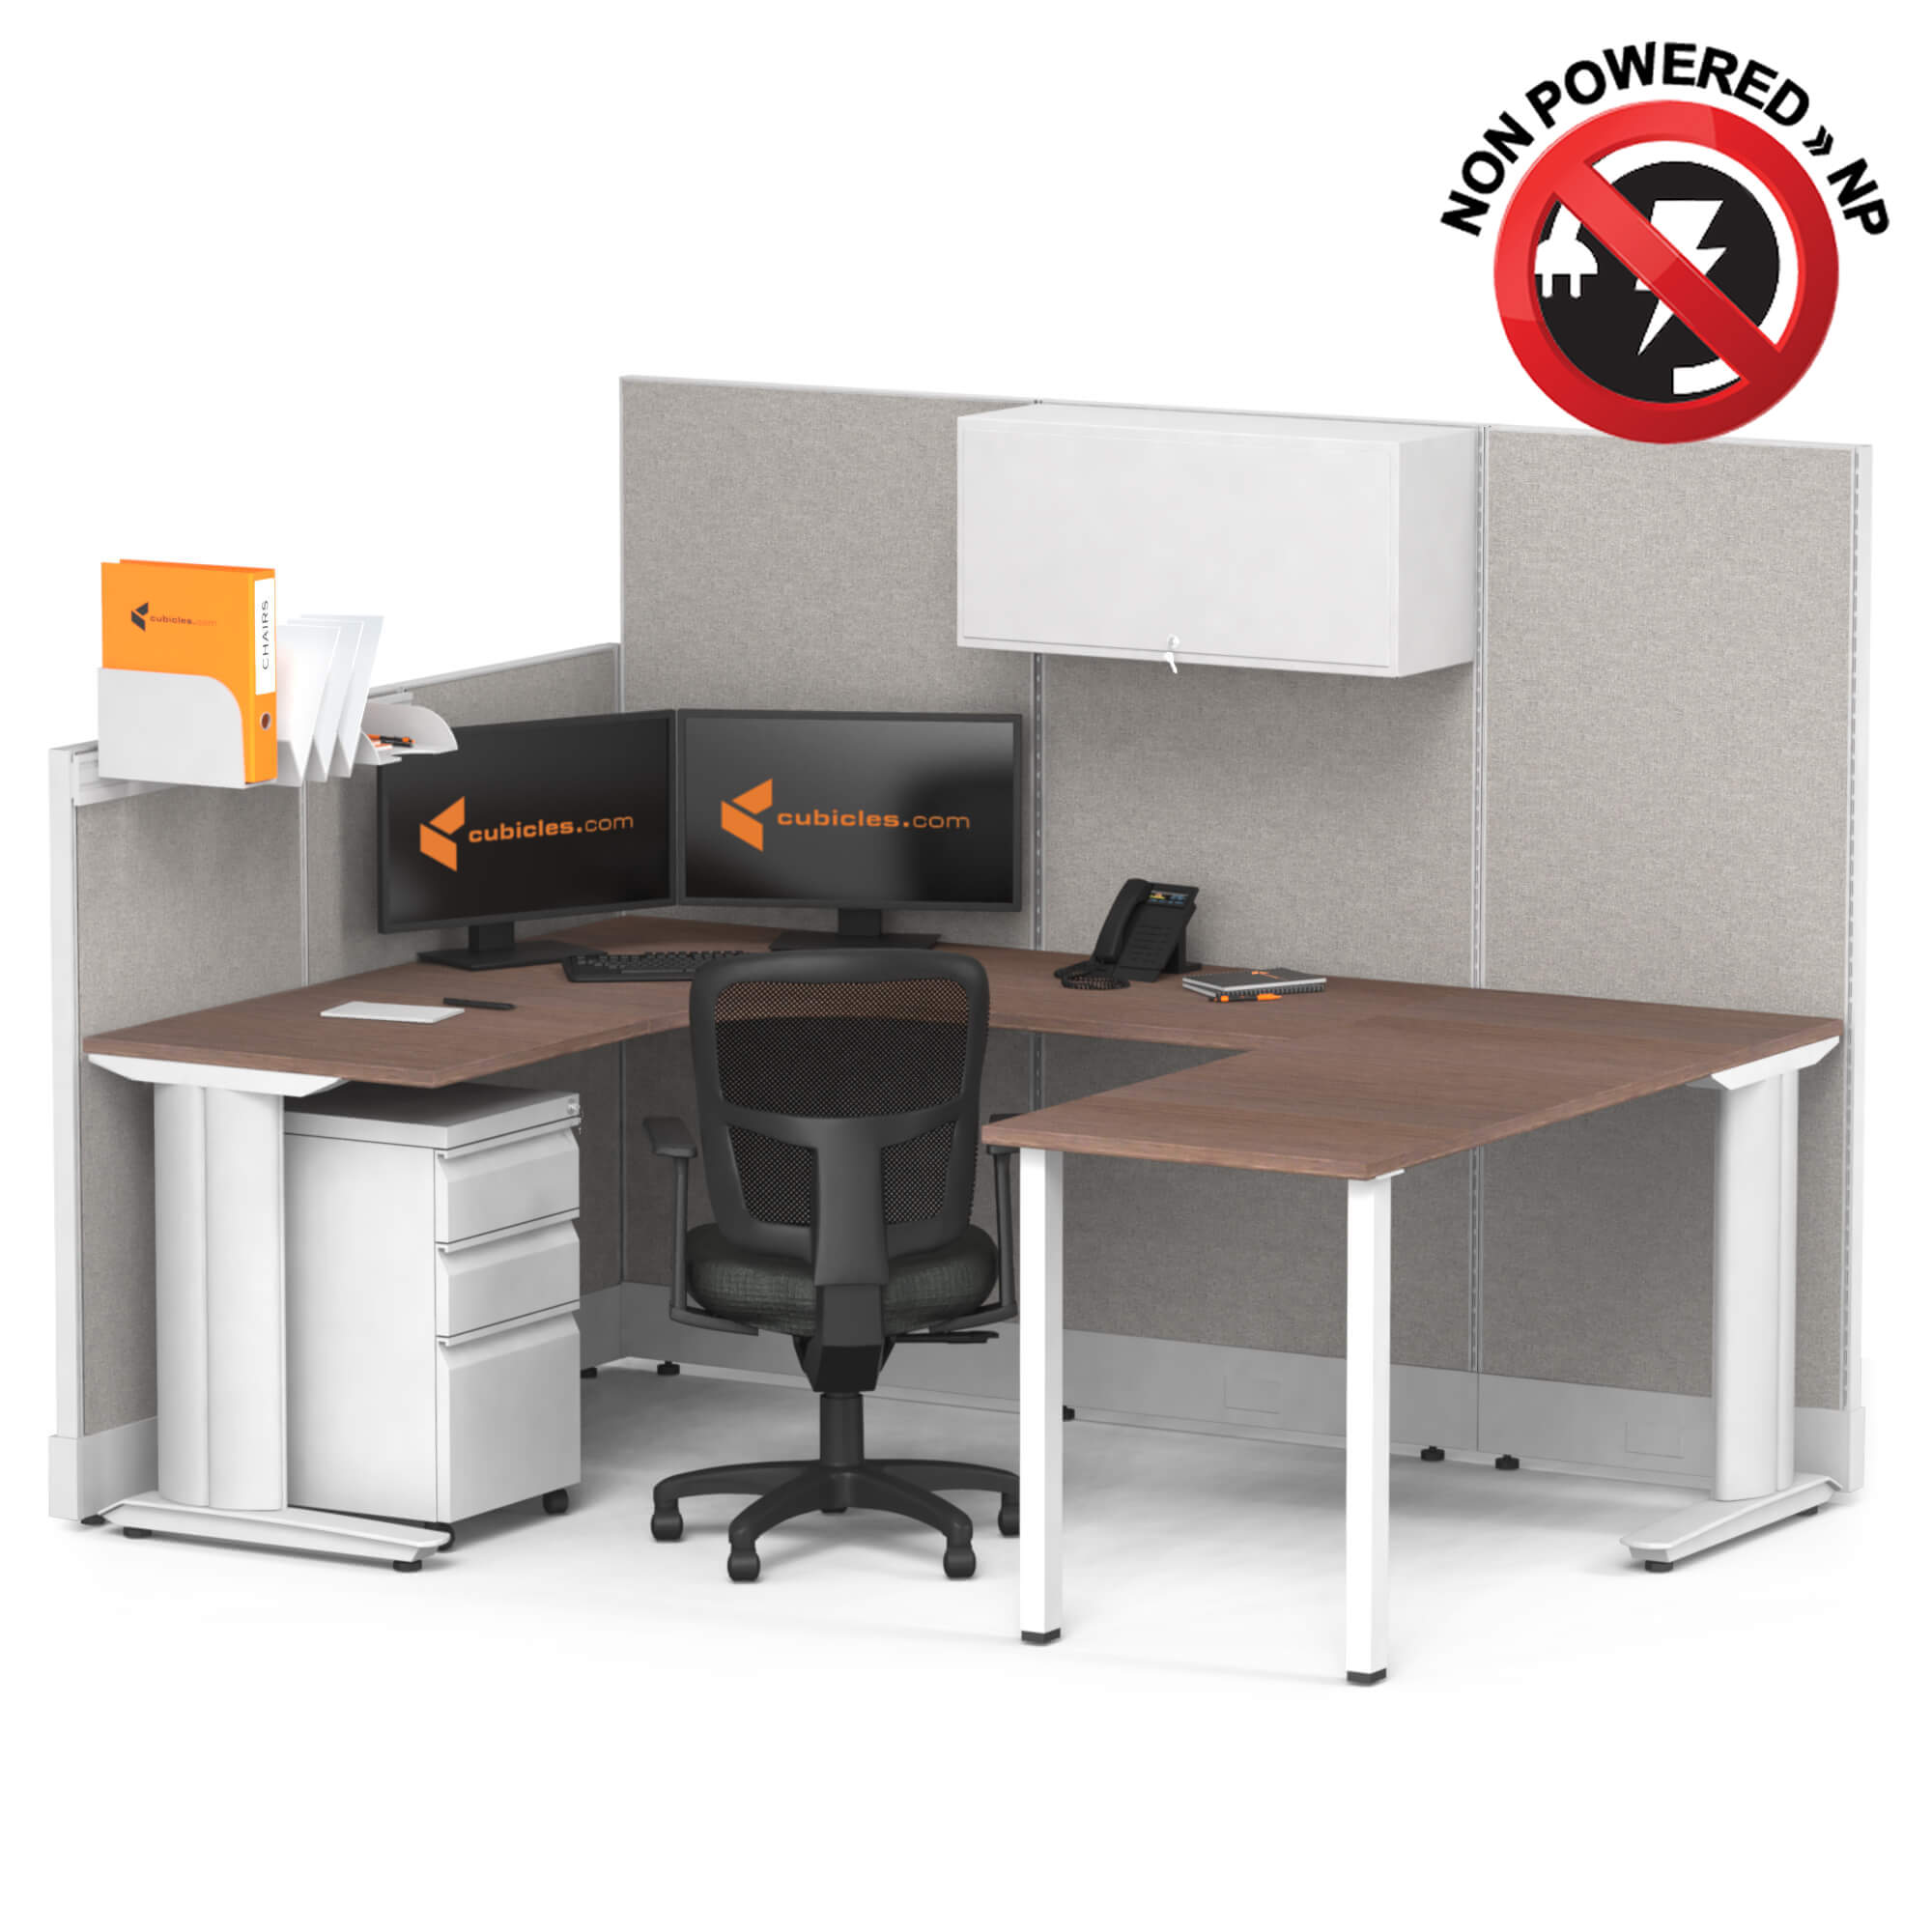 Cubicle desk u shaped with storage 1pack non powered